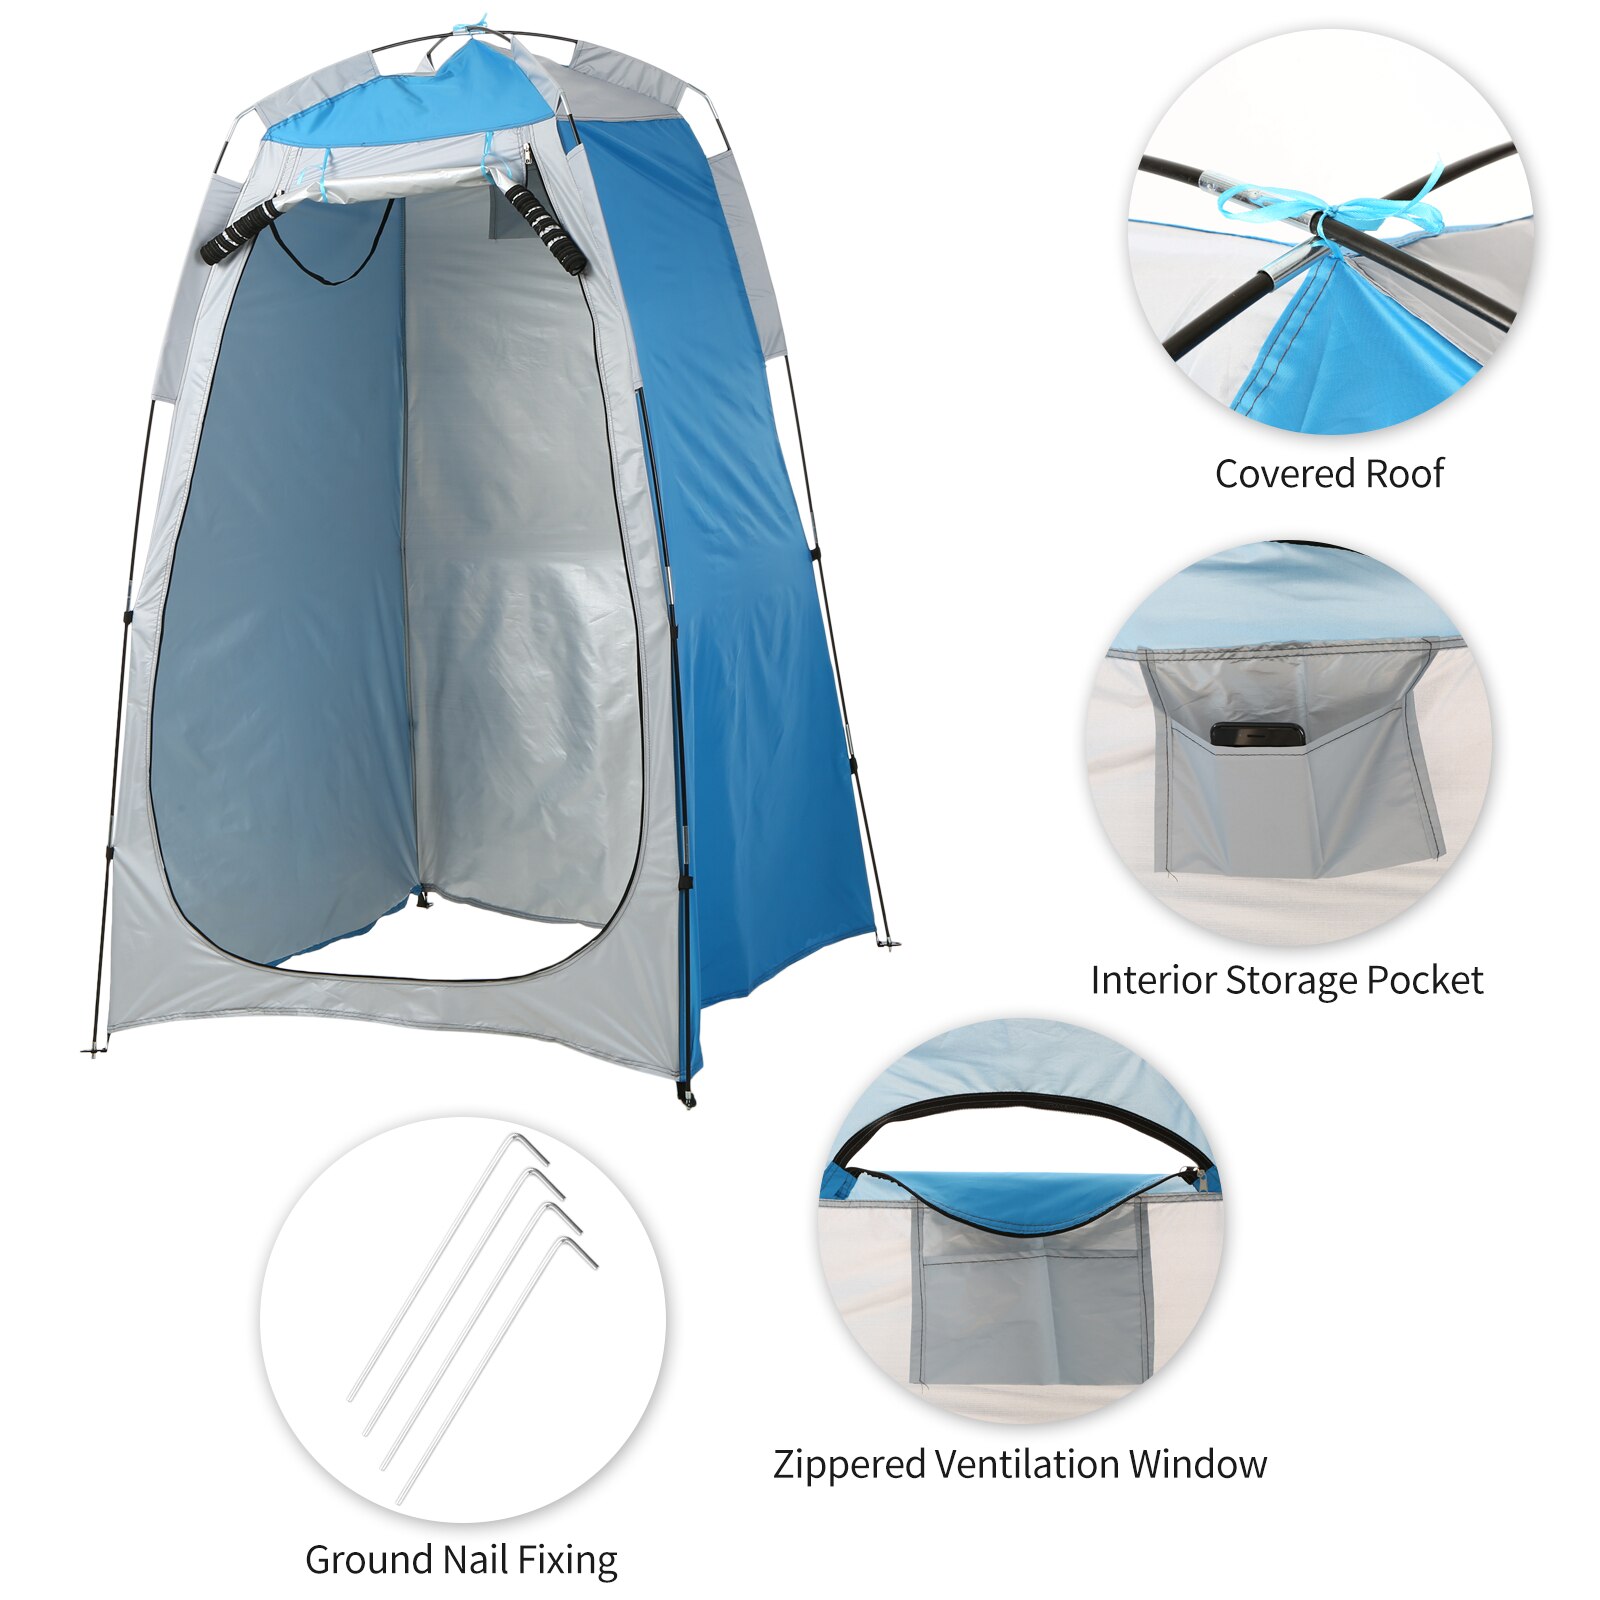 Cheap Goat Tents Portable Camping Beach Tent Bath Changing Fitting Room Privacy Toilet Outdoor Shower Tent Sun Rain Shelter For Camping Traveling